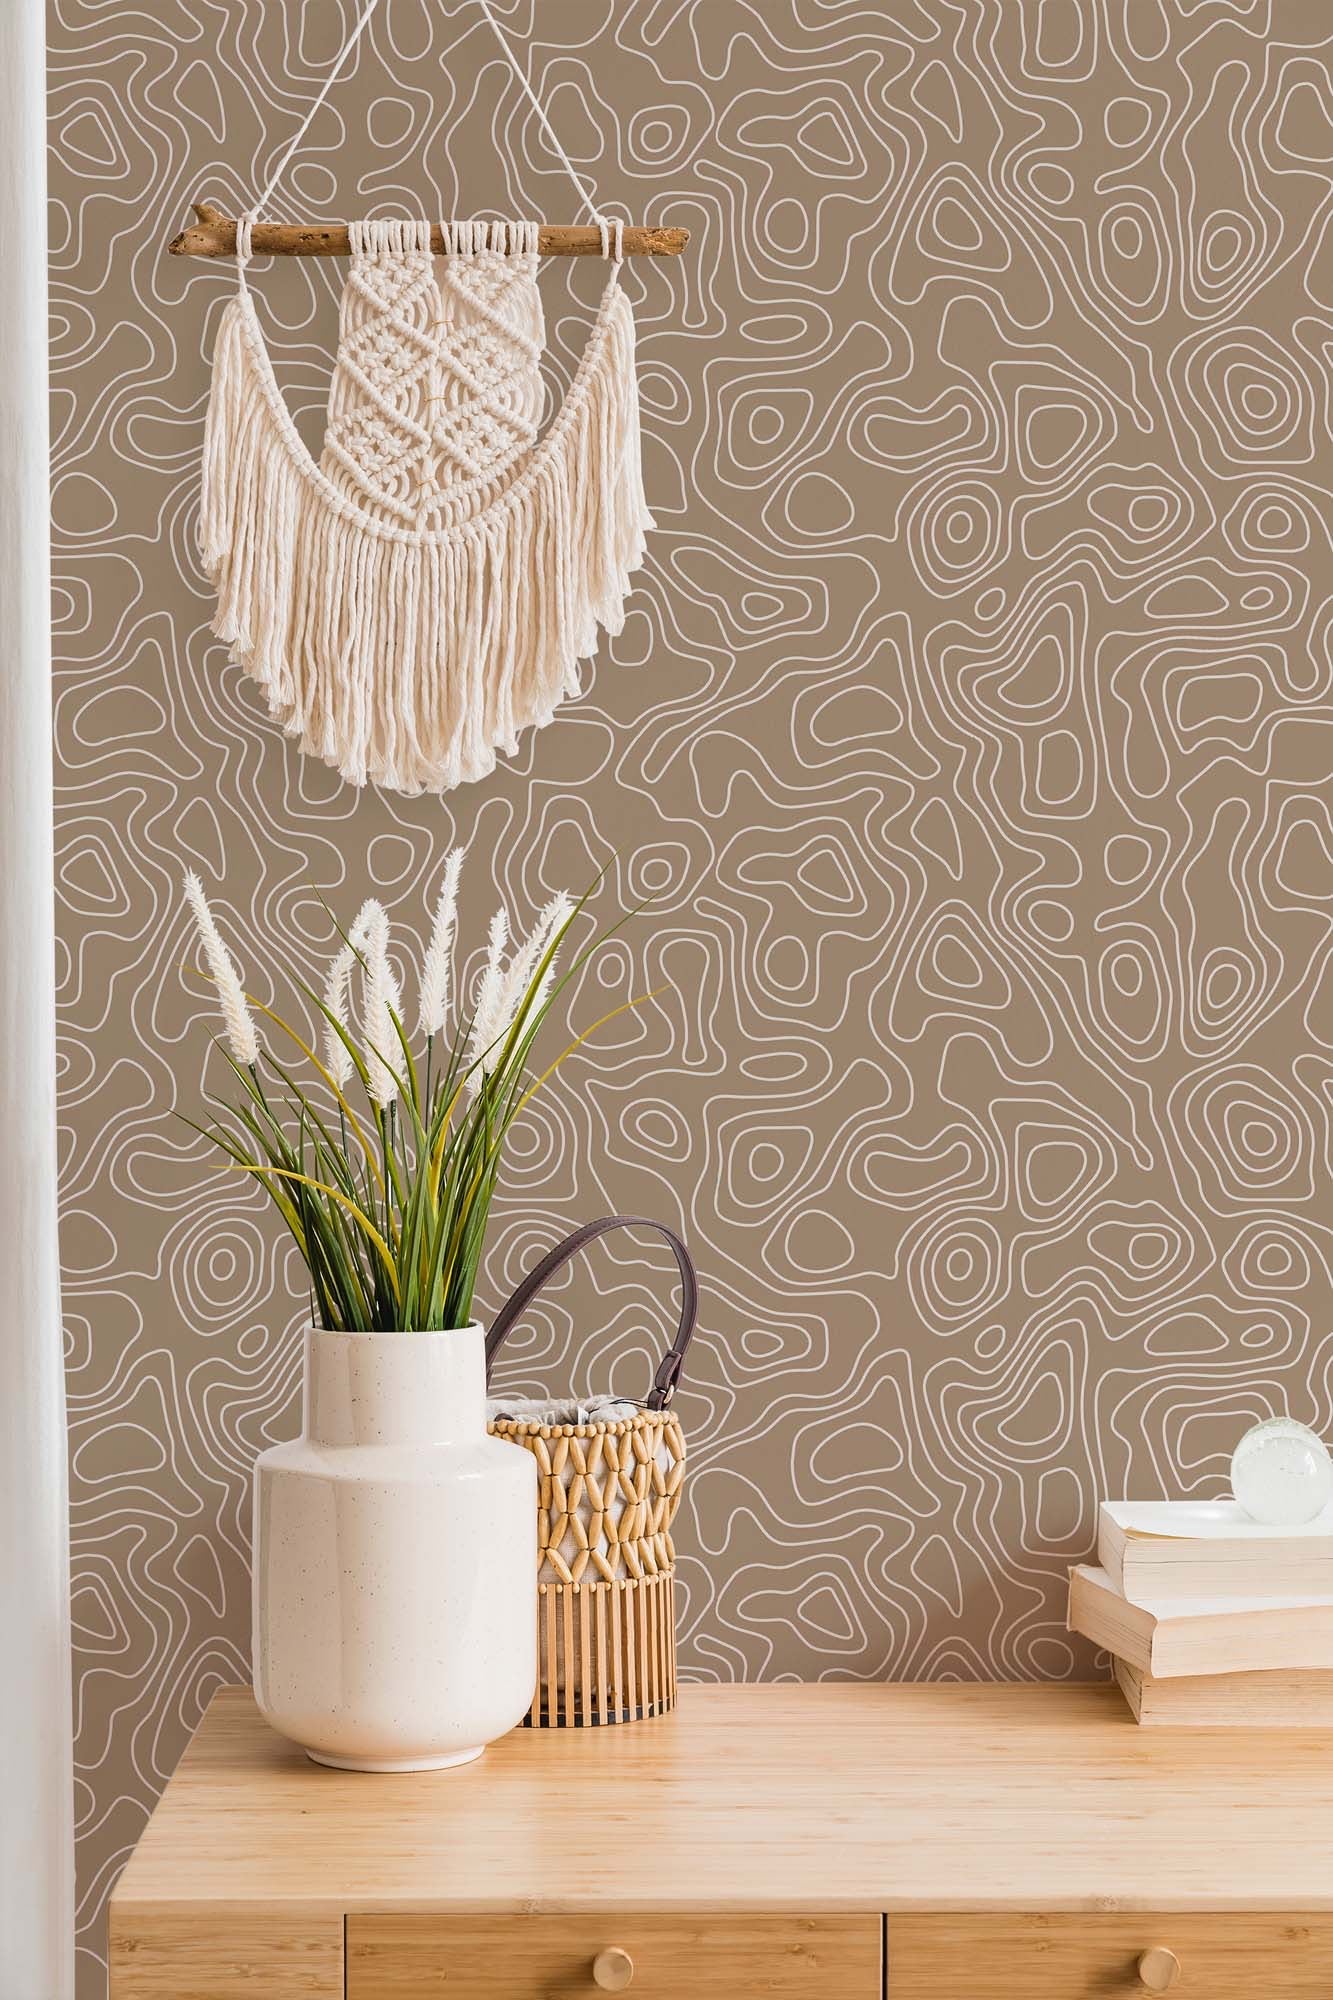 Camper van or Home Wallpaper - Abstract Topography Wallpaper for Camper or Home - Neutral Brown and White - Peel and Stick or Traditional Wallpaper